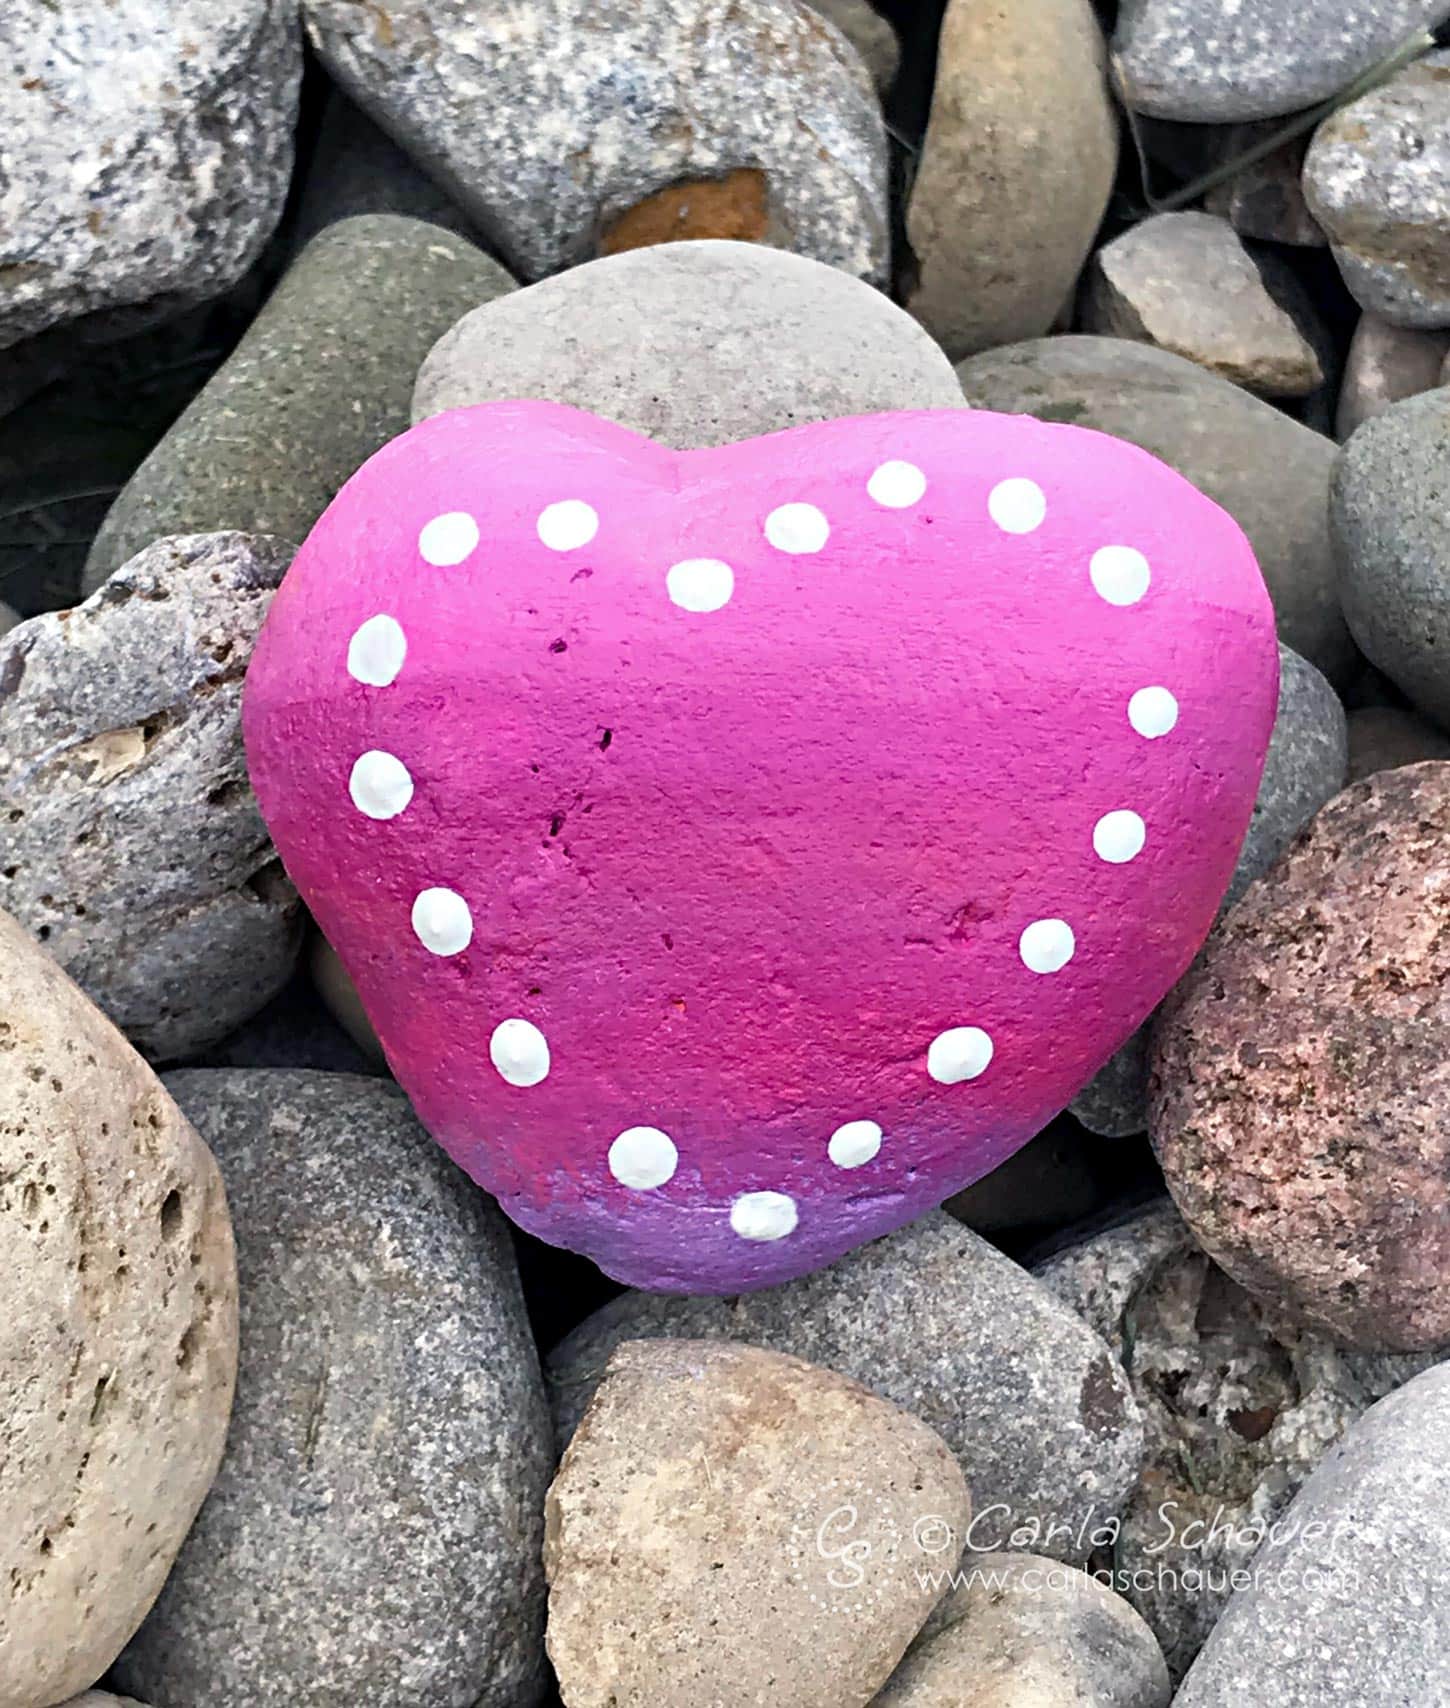 Heart shaped rock painted with a pink and purple ombre gradient, with white dots around border.